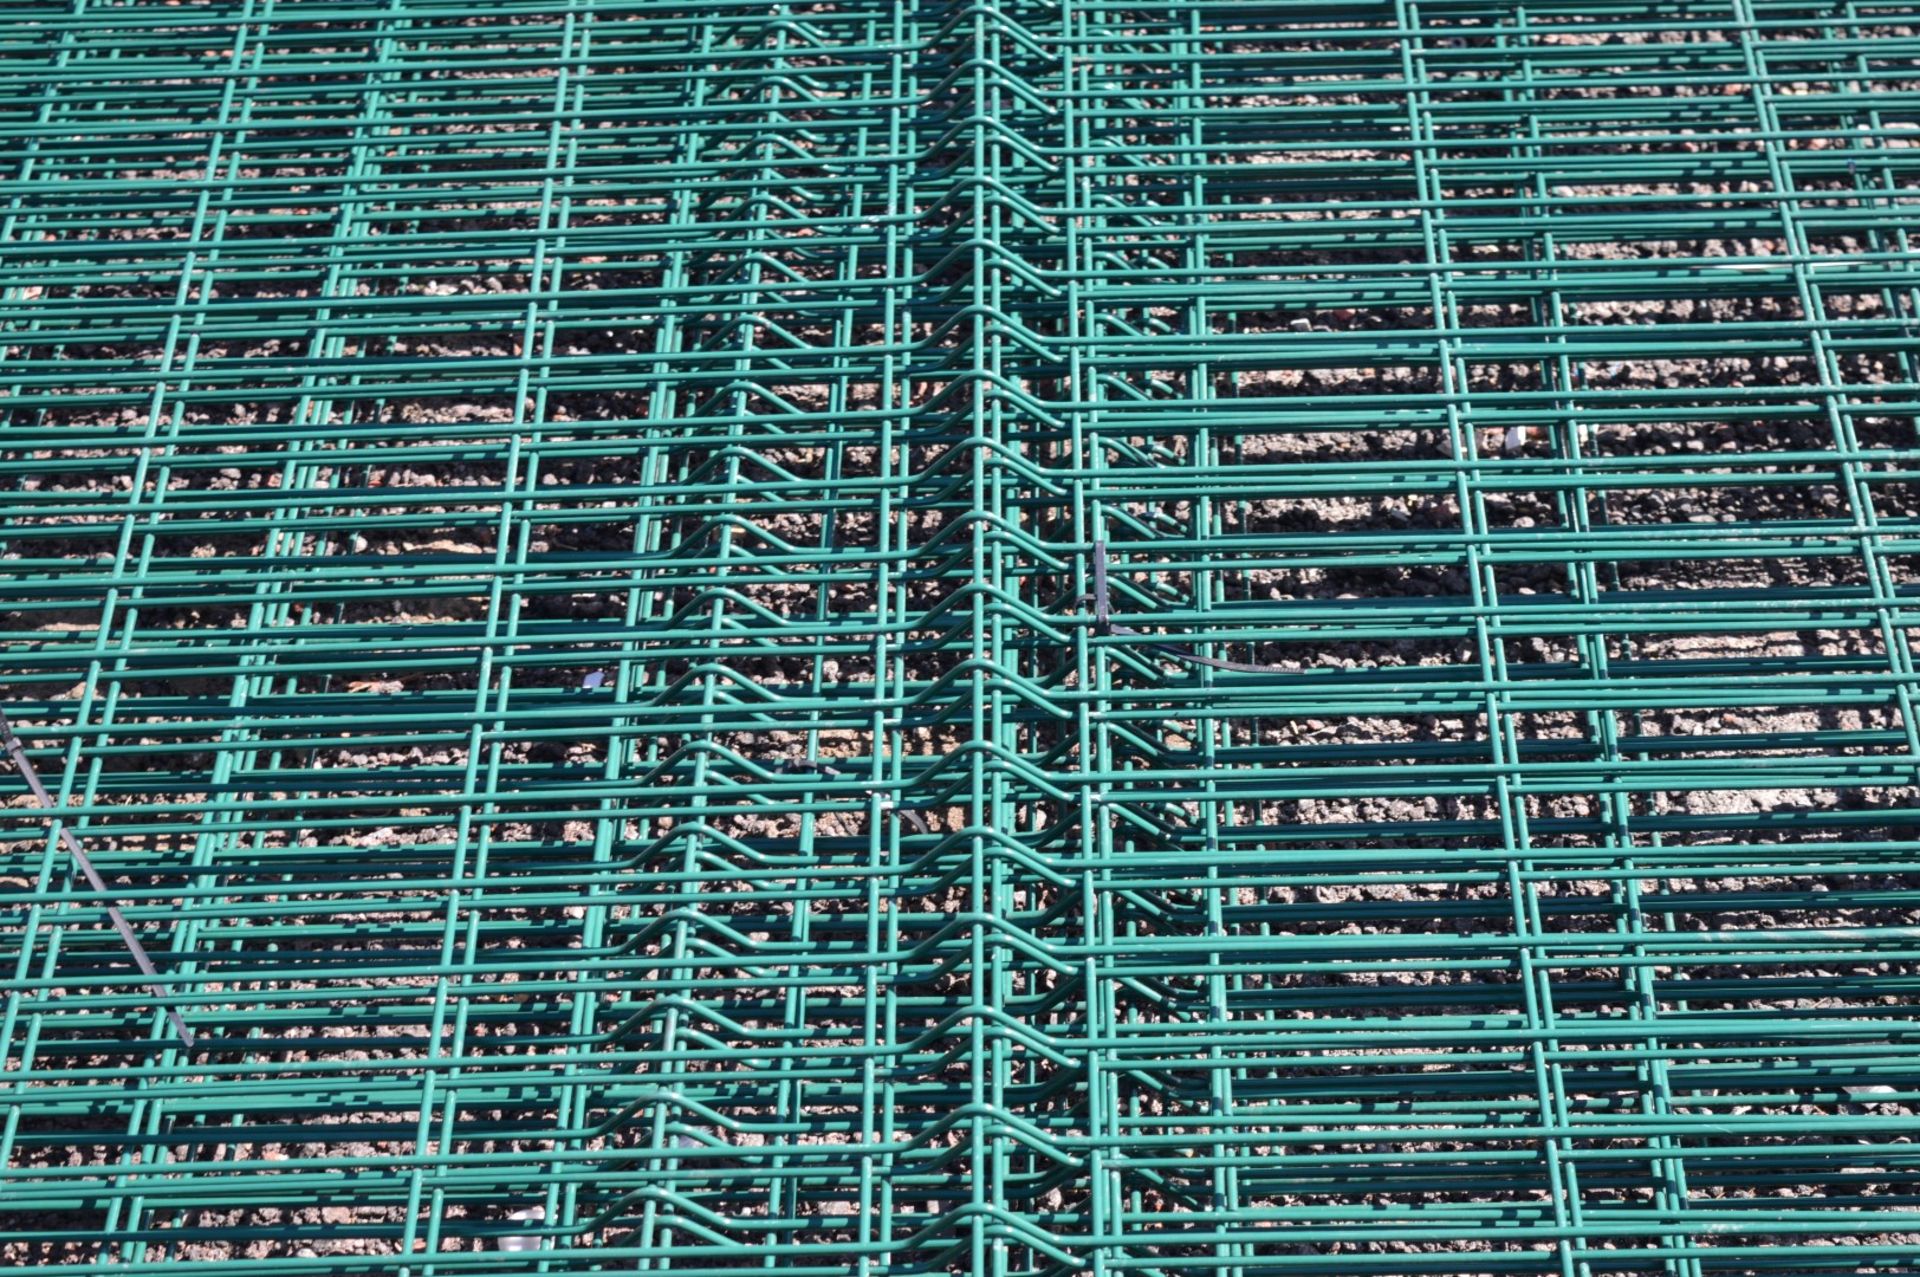 7 x Sections of Wire Fence in Green - Includes Fence Posts - Each Panel Measures 300 x 250 cms - - Image 5 of 5